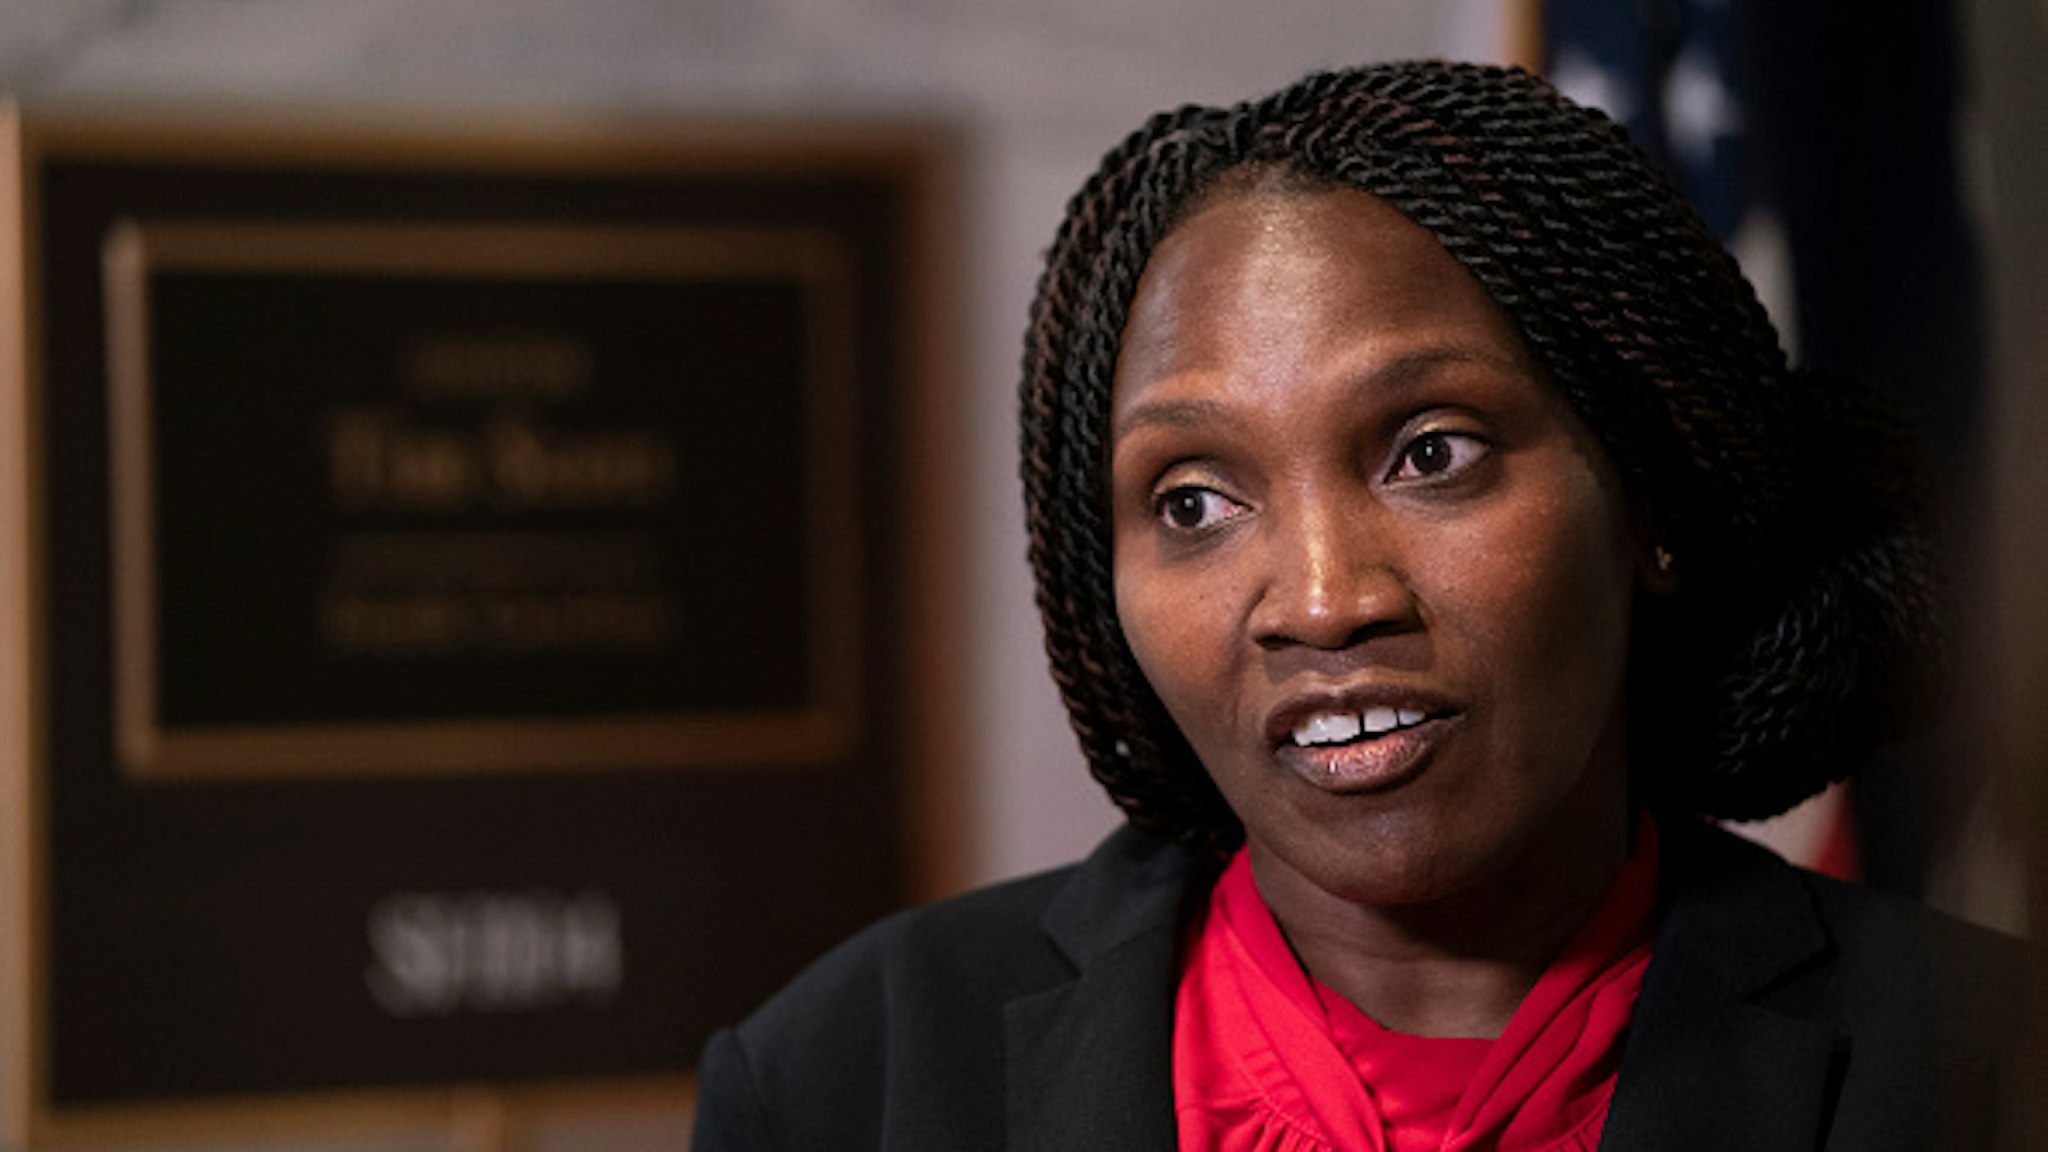 WASHINGTON, DC - JUNE 16: Wanda Cooper-Jones, mother of Ahmaud Arbery, speaks to reporters outside of Sen. Tim Scott's (R-SC) office in the Hart Senate Office Building on June 16, 2020 in Washington, DC. Cooper-Jones, along with other family members who've had loved ones die in encounters with police, met with President Trump earlier in the day on Tuesday and later met with Sen. Scott about police brutality and desired reforms.